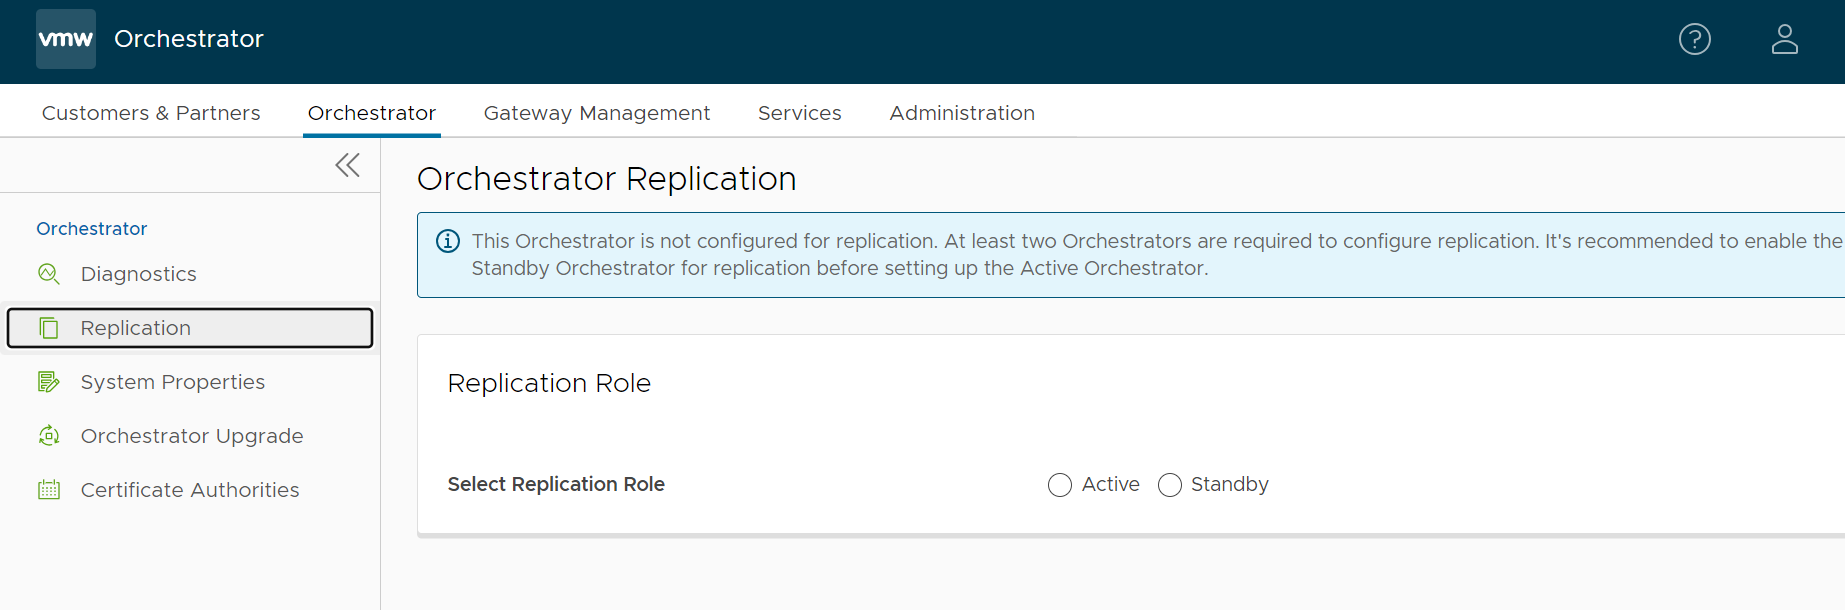 Orchestrator Replication screen - The Standby radio button begins the replication process.